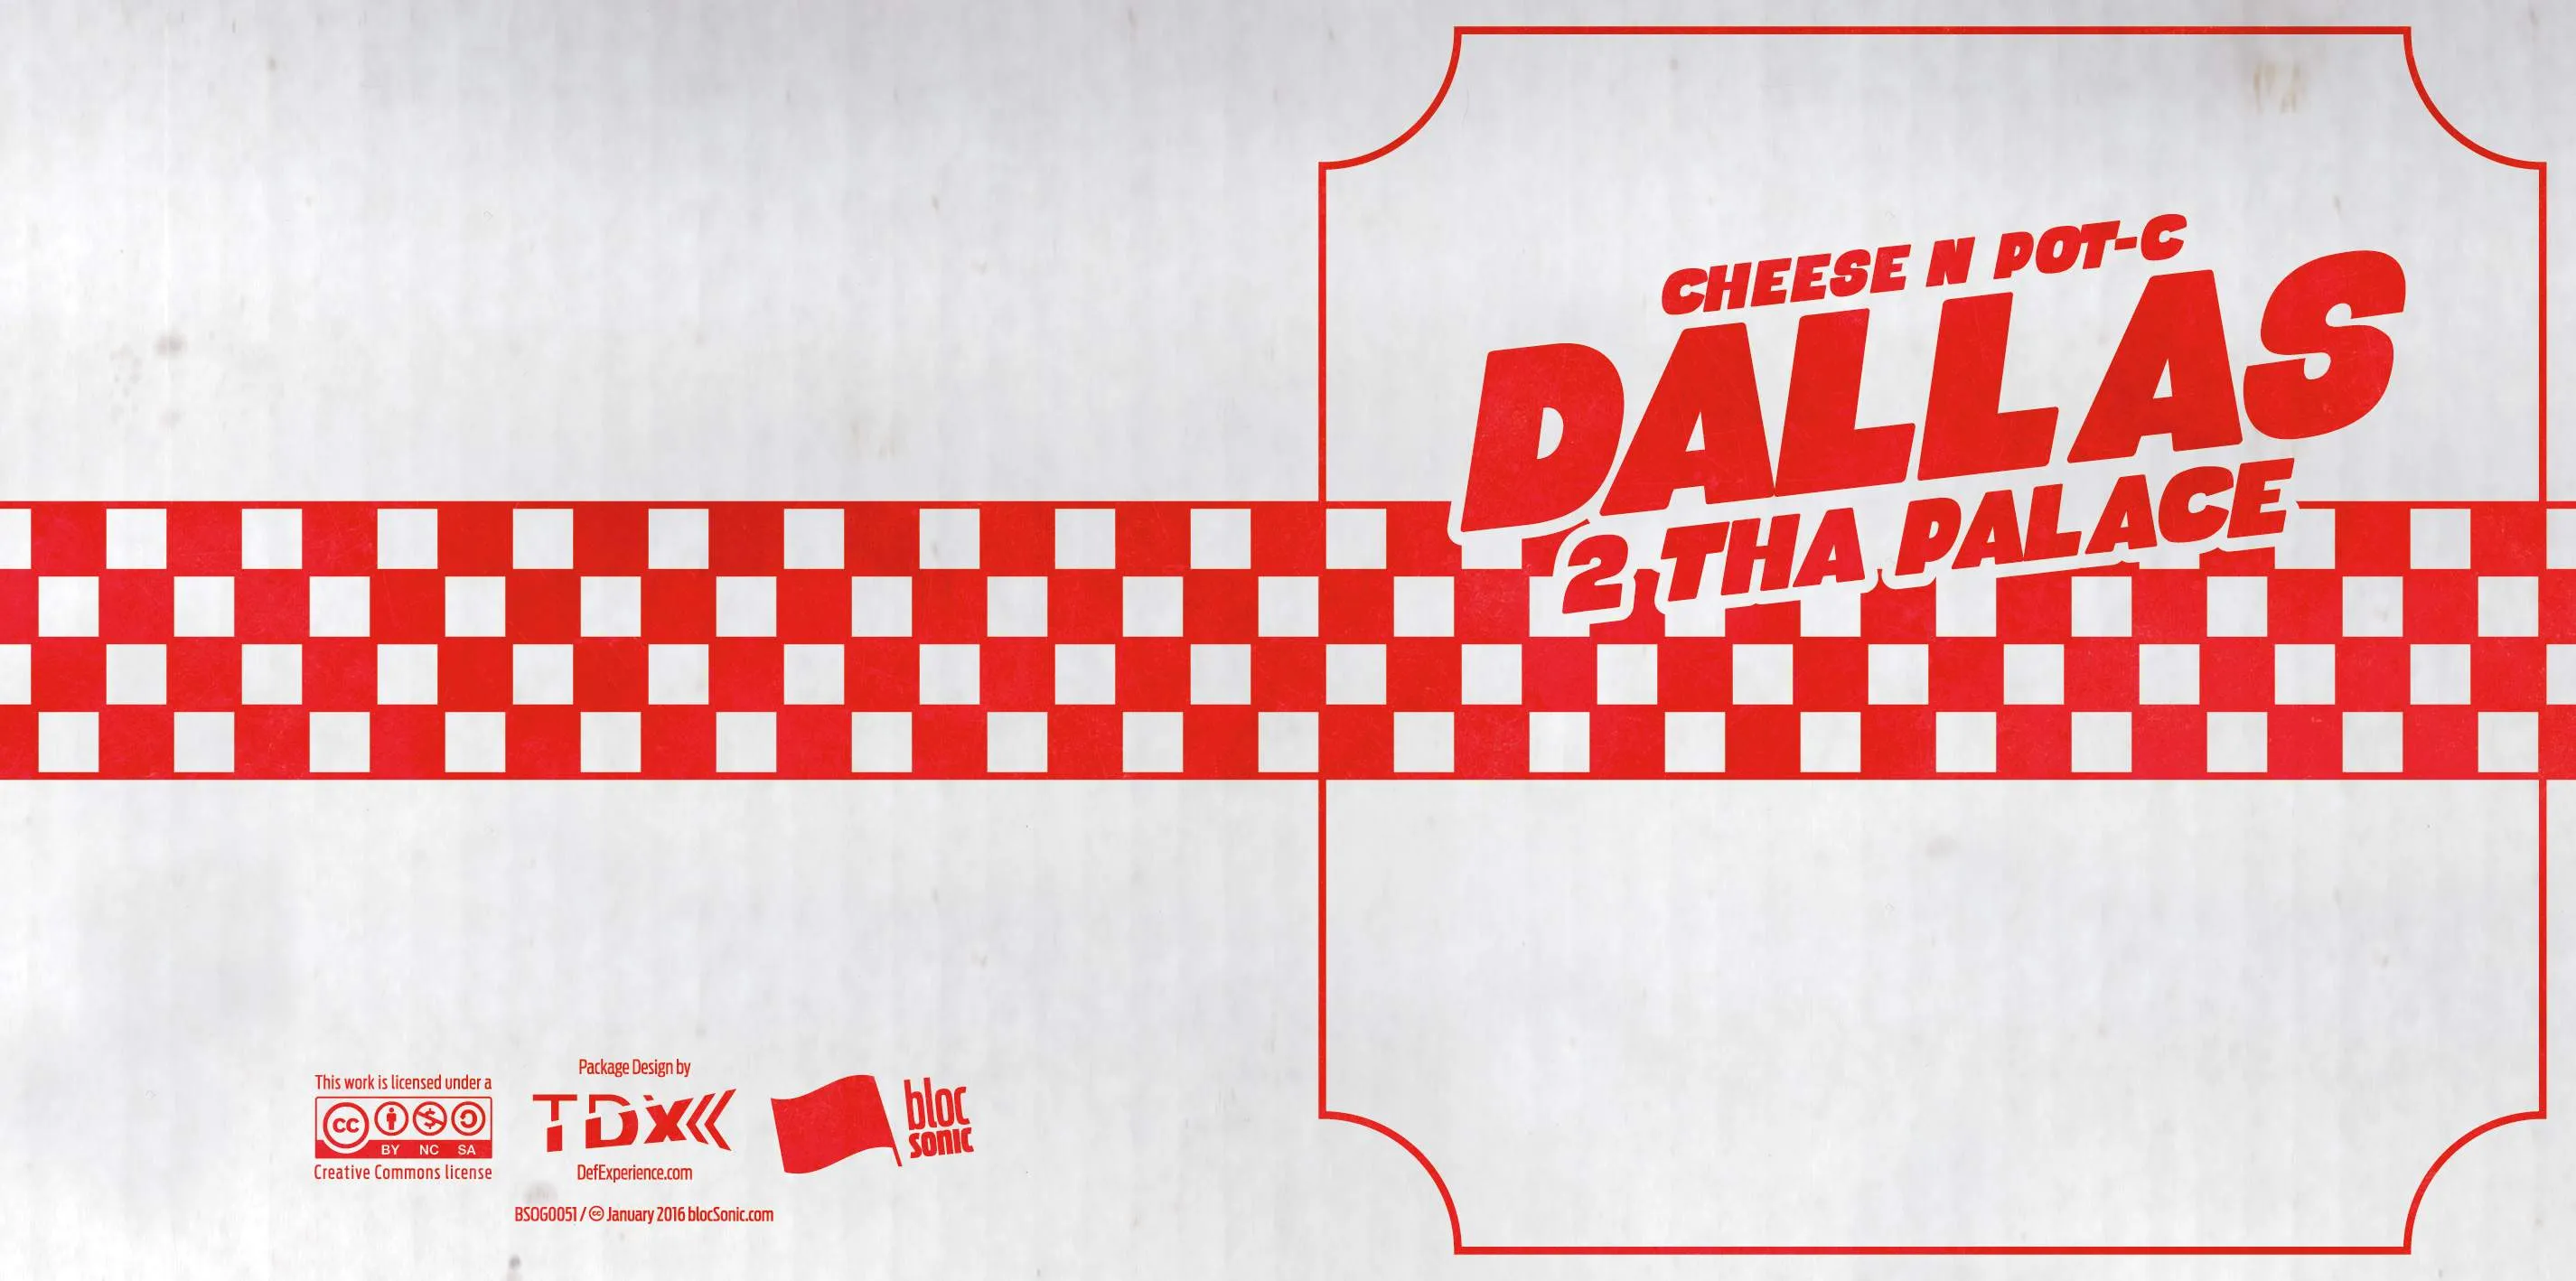 Album insert for “Dallas 2 Tha Palace” by Cheese N Pot-C